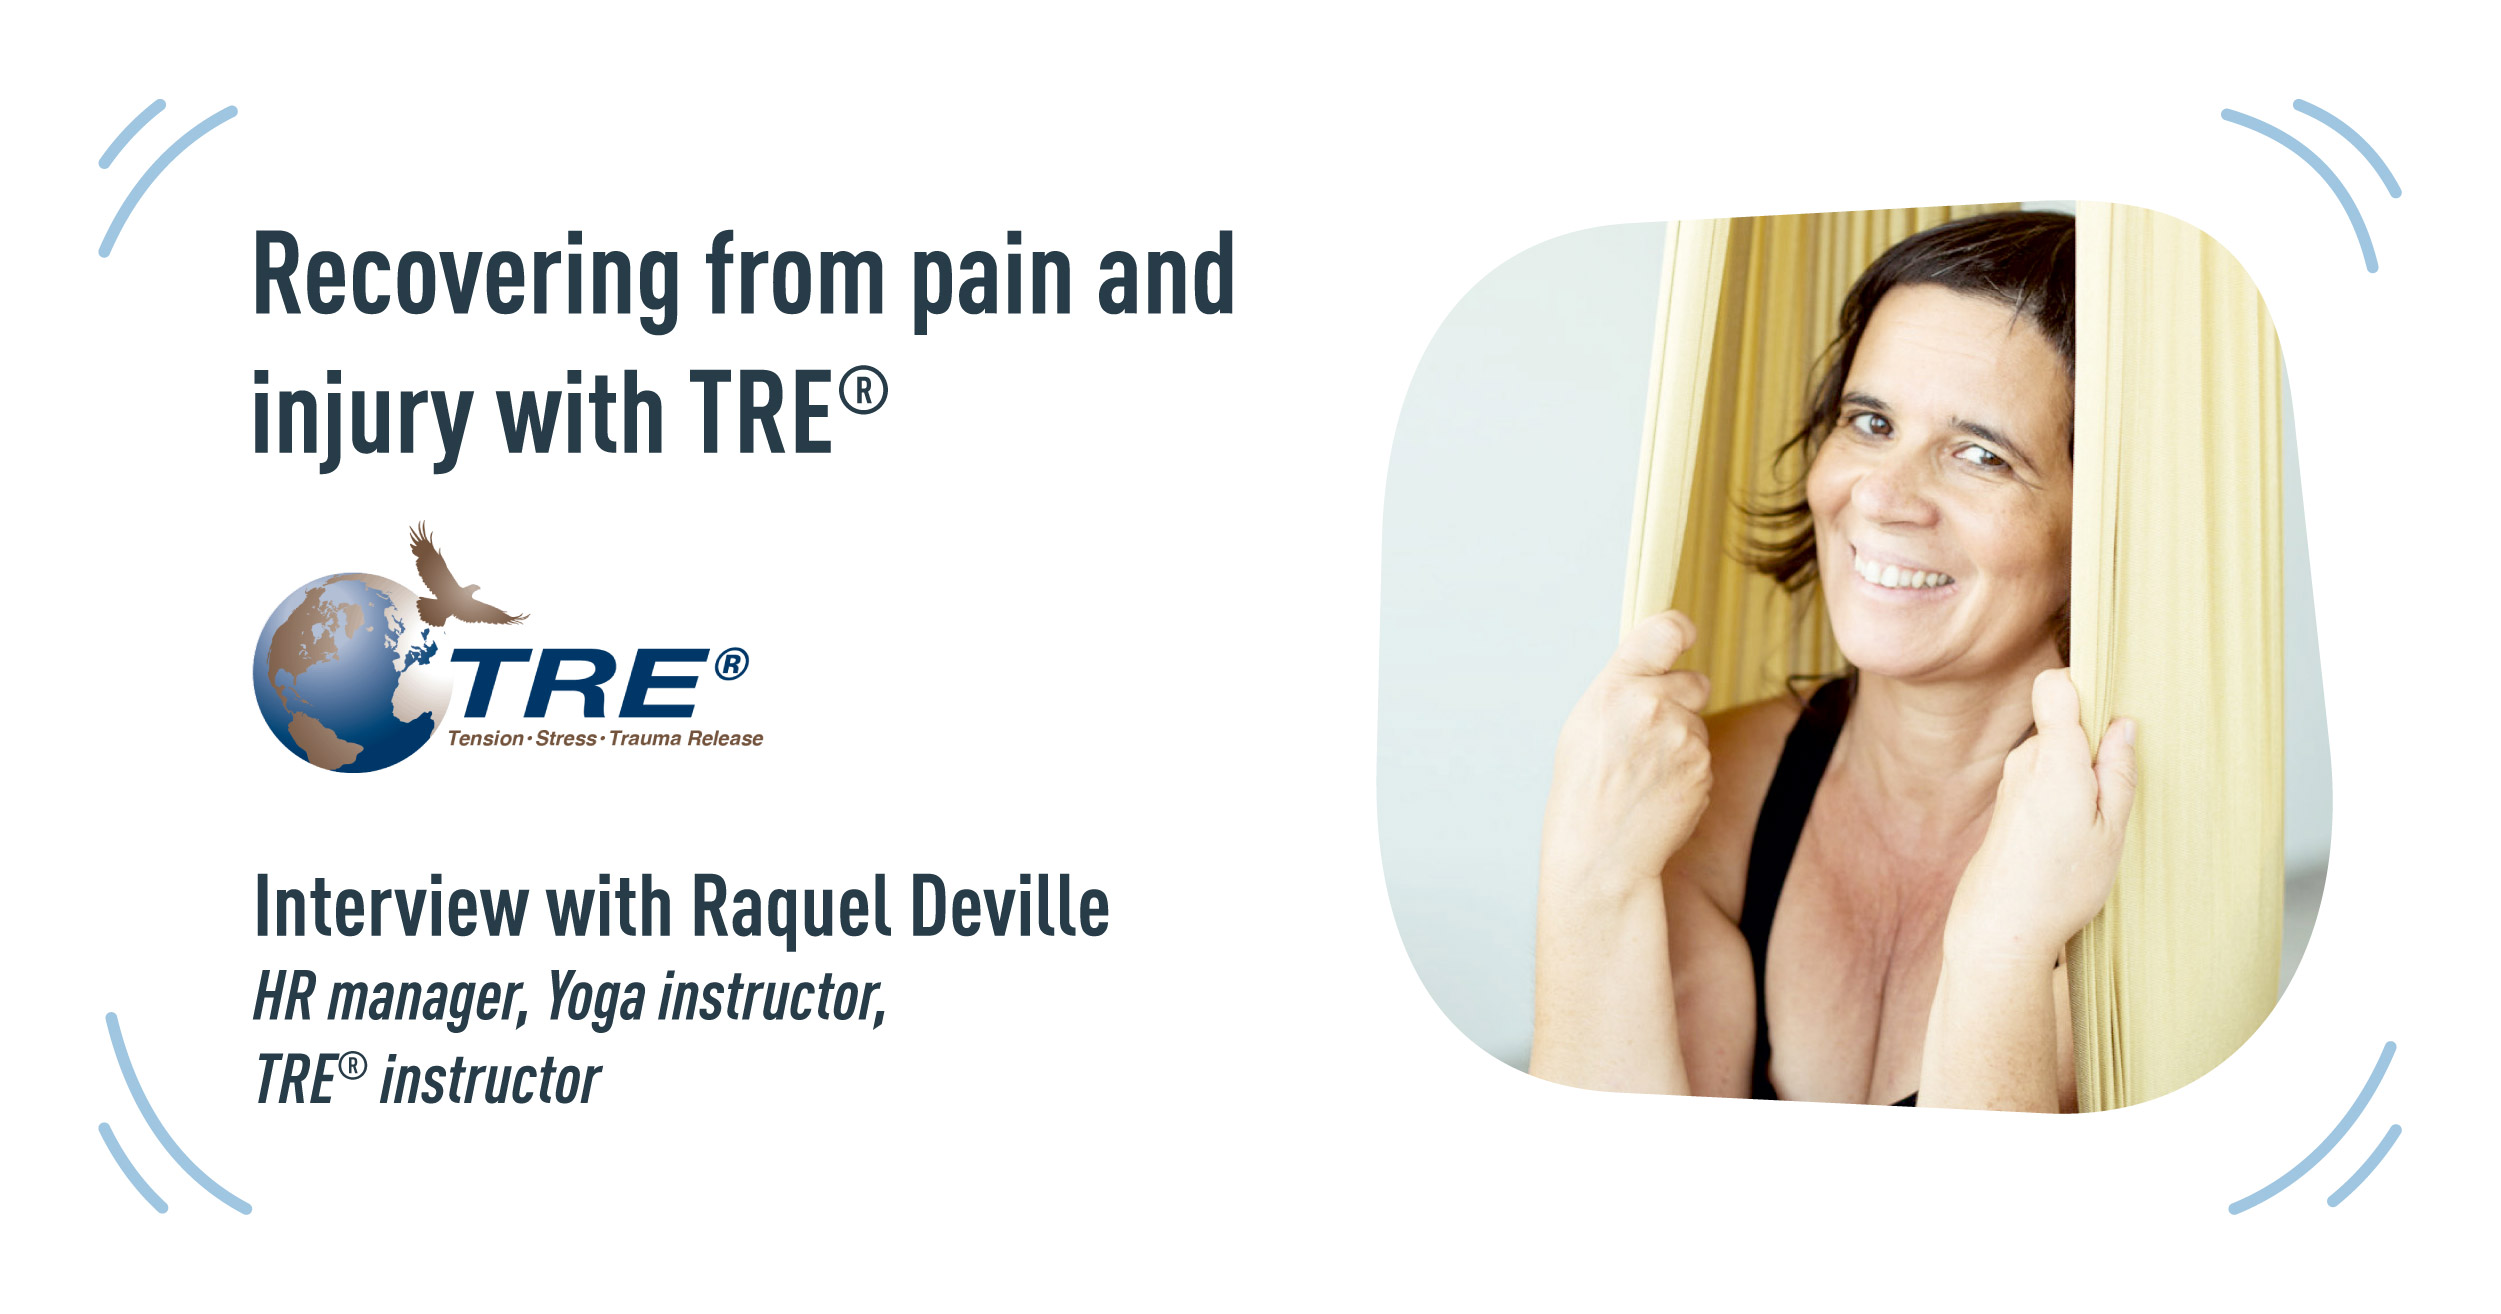 Recovering from pain and injury with TRE®. Interview with Raquel Deville